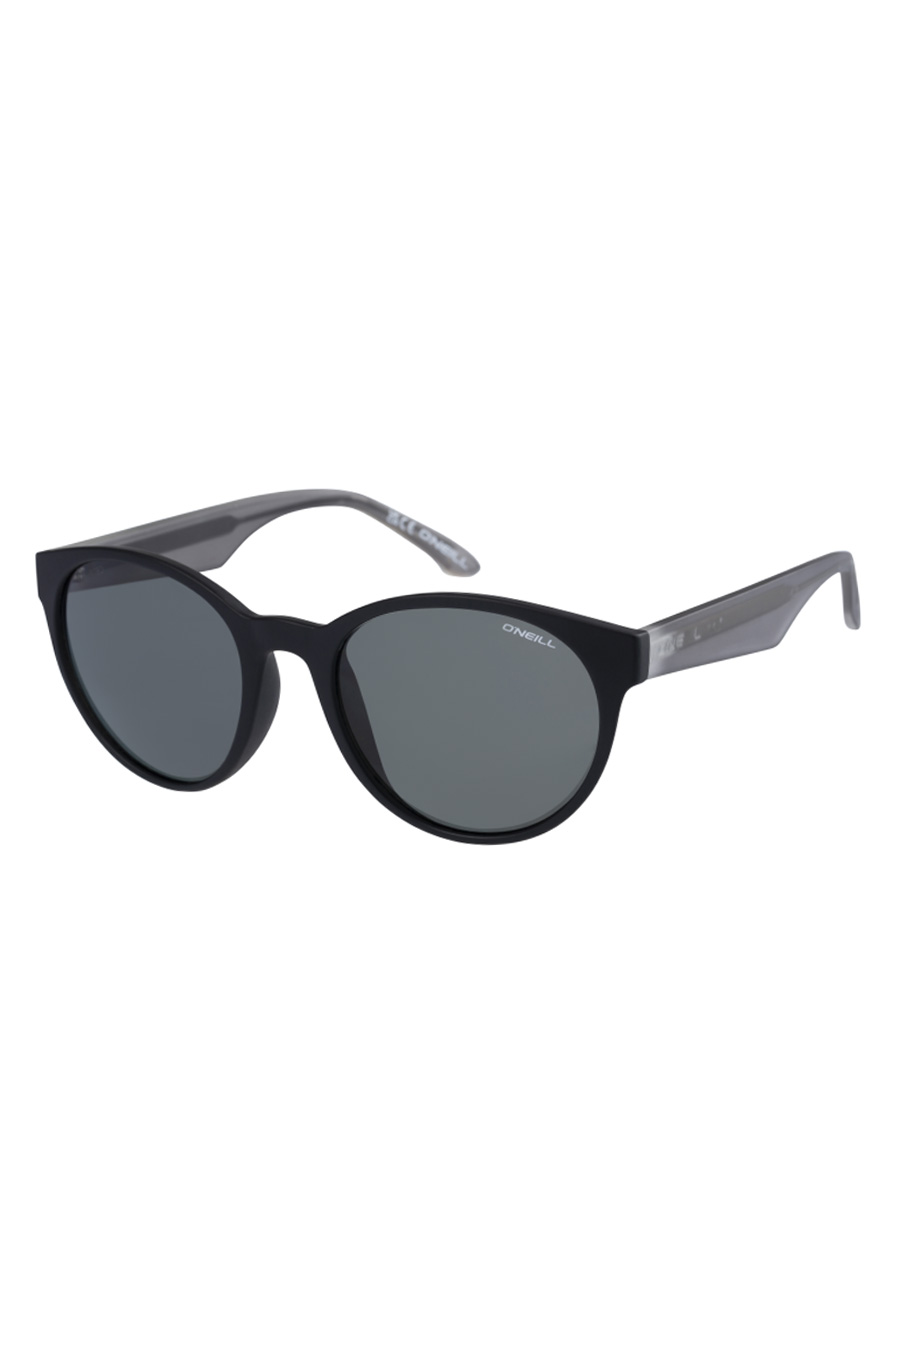 Saulesbrilles ONEILL ONS-9009-20-104P